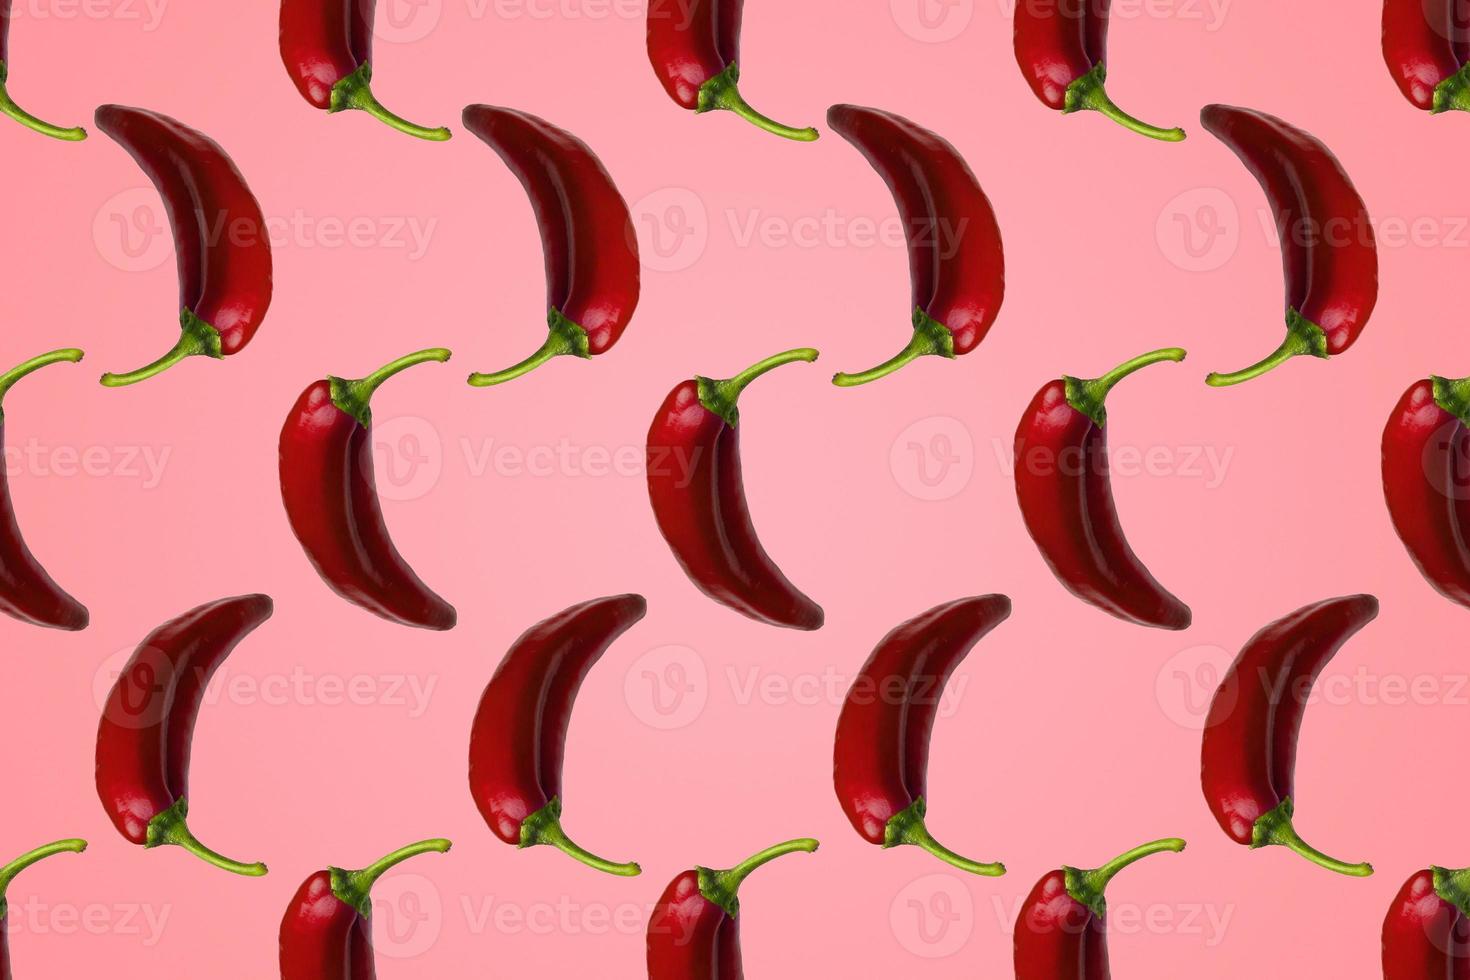 Pattern of red peppers isolated on pink background. Creative photo of peppers aligned with copy space.